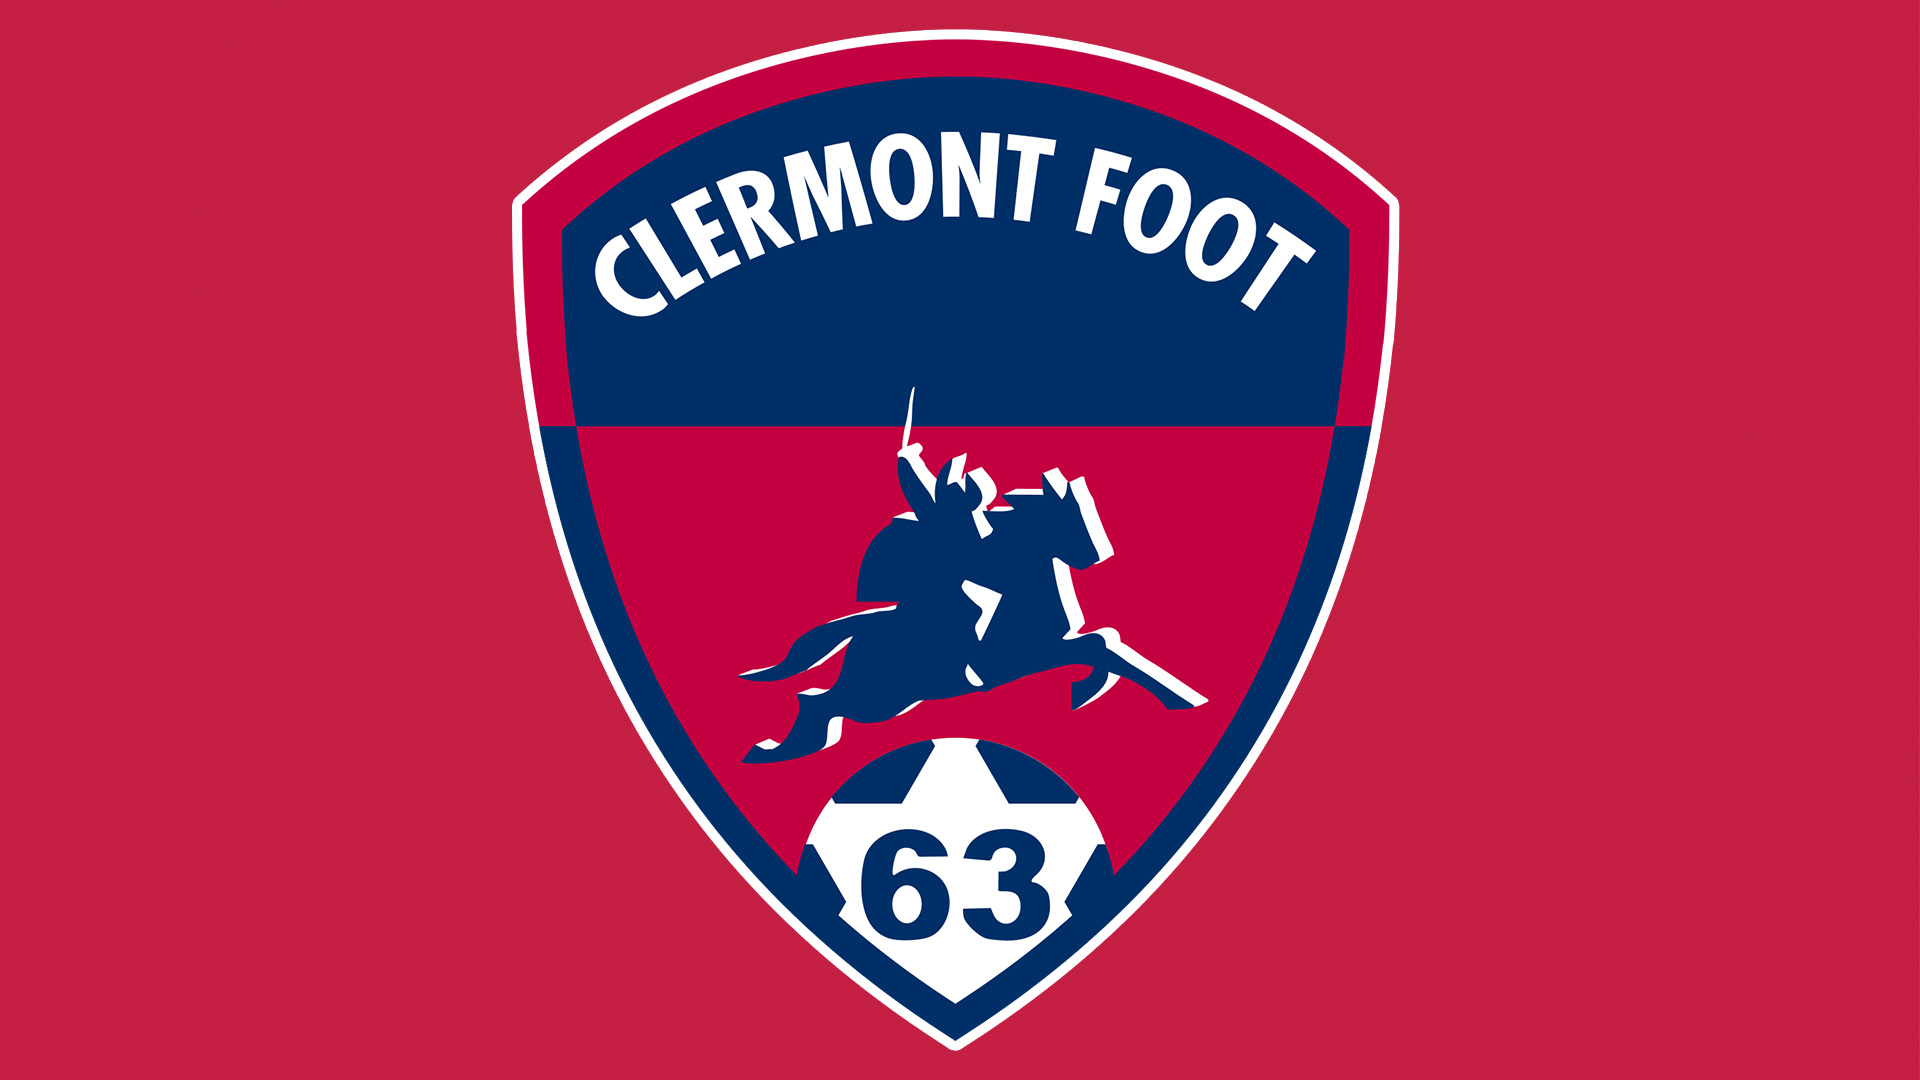 Clermont Foot 63 vs Grenoble